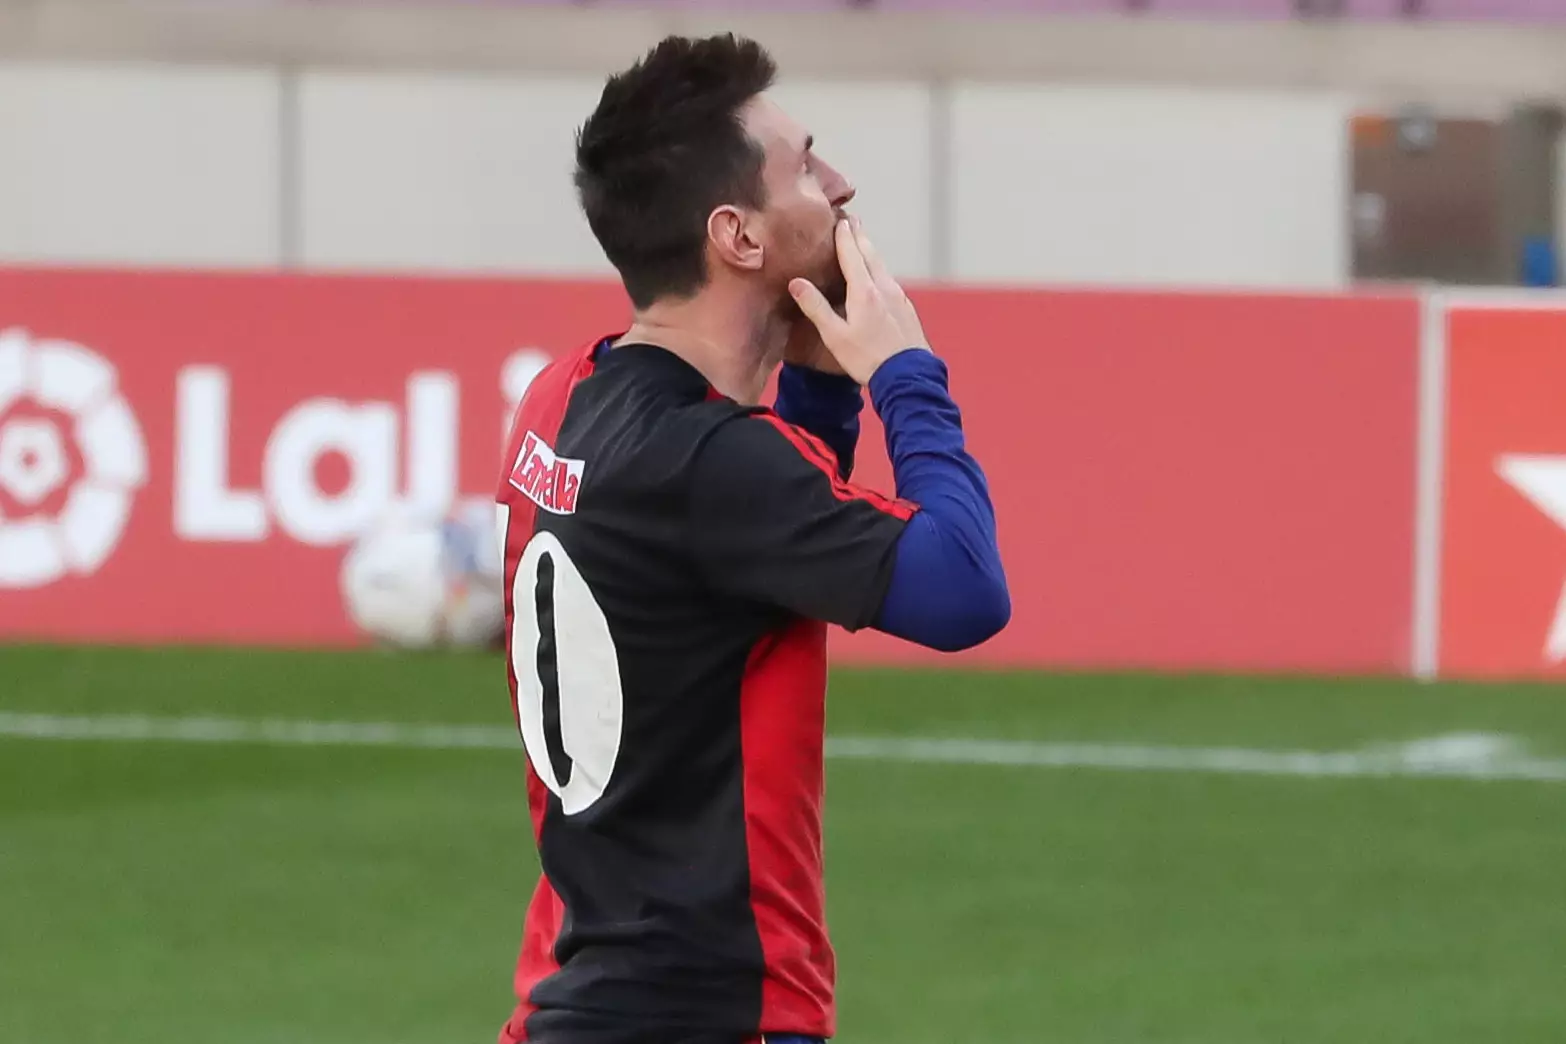 Messi paid tribute to Diego Maradona earlier this season with a Newell's Old Boys' shirt. Image: PA Images